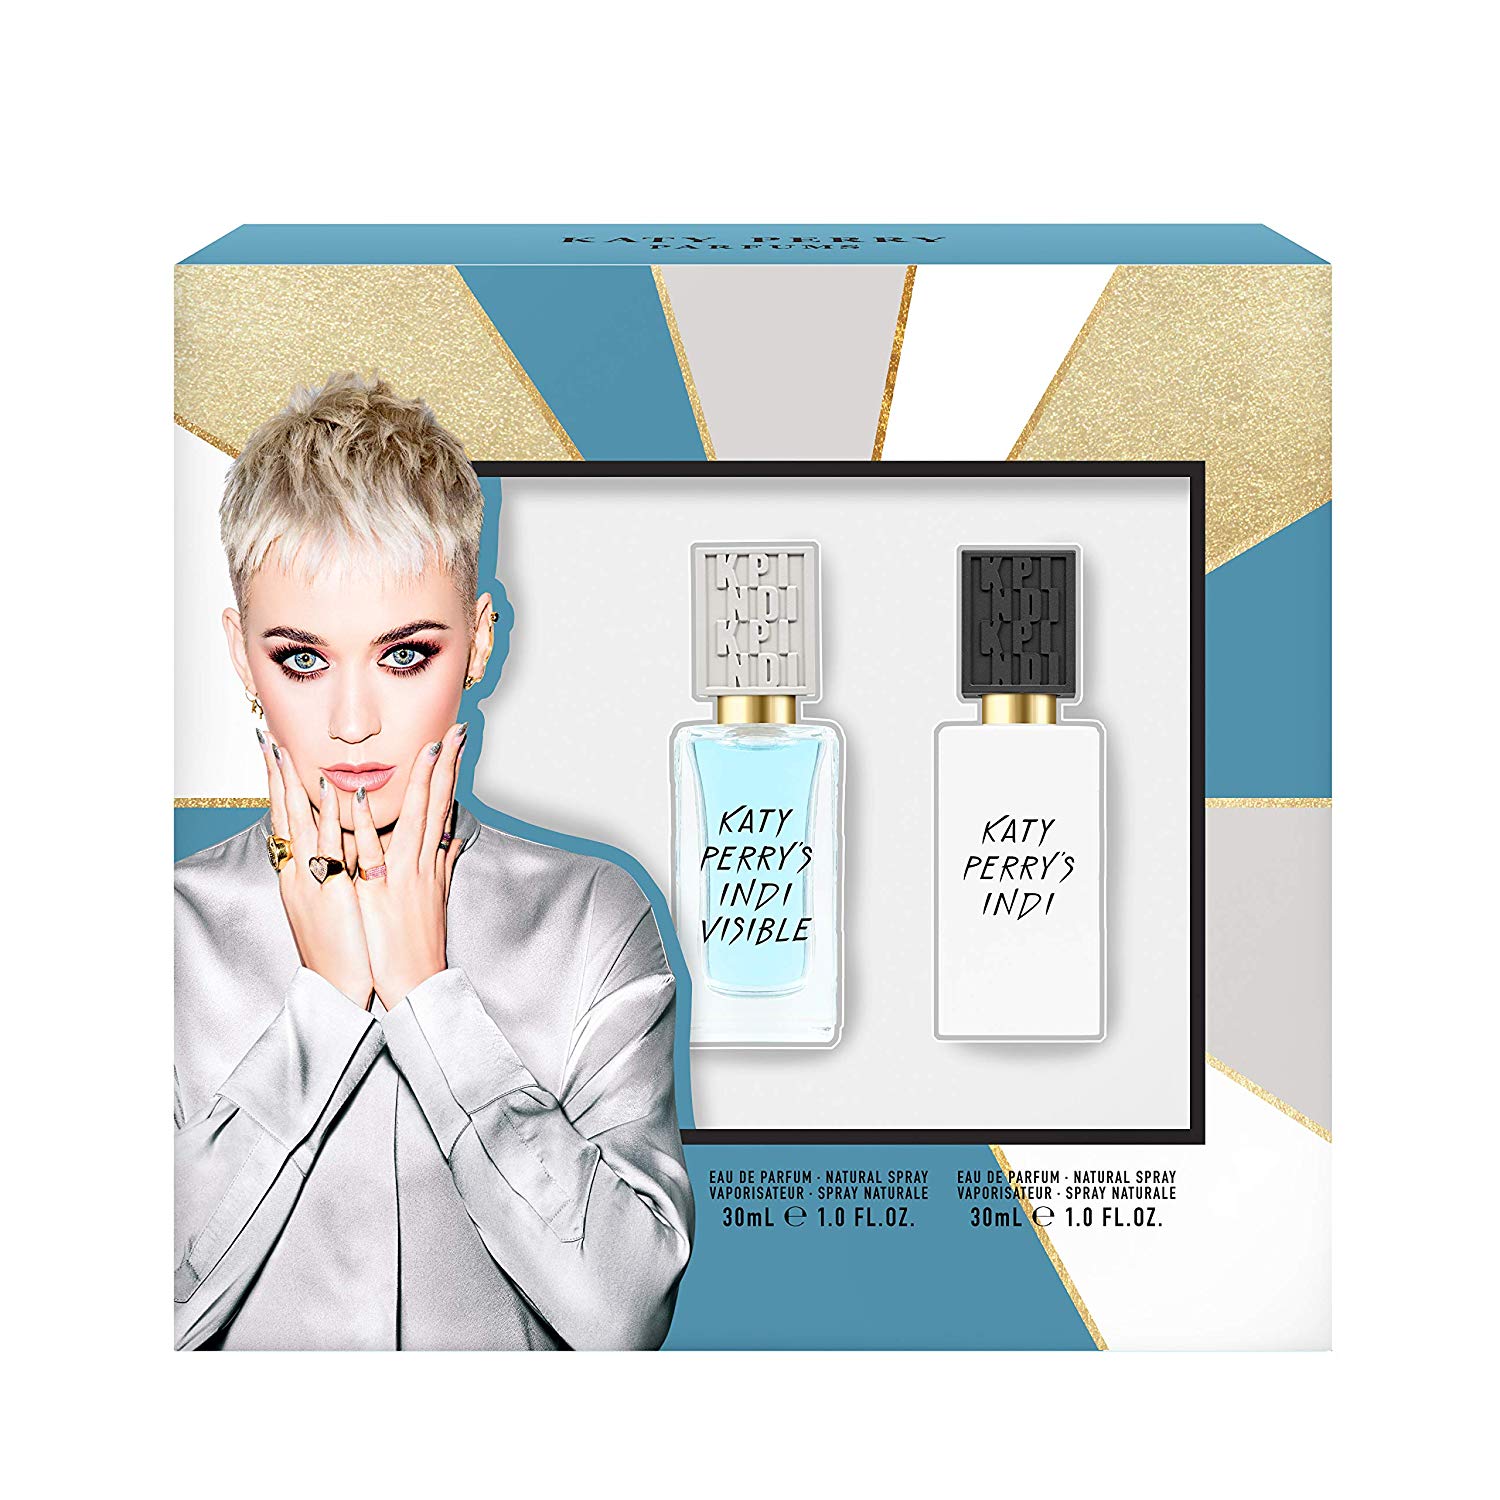 Katy Perry Assorted Perfume Gift Set for Women, 2 Pieces - image 1 of 2